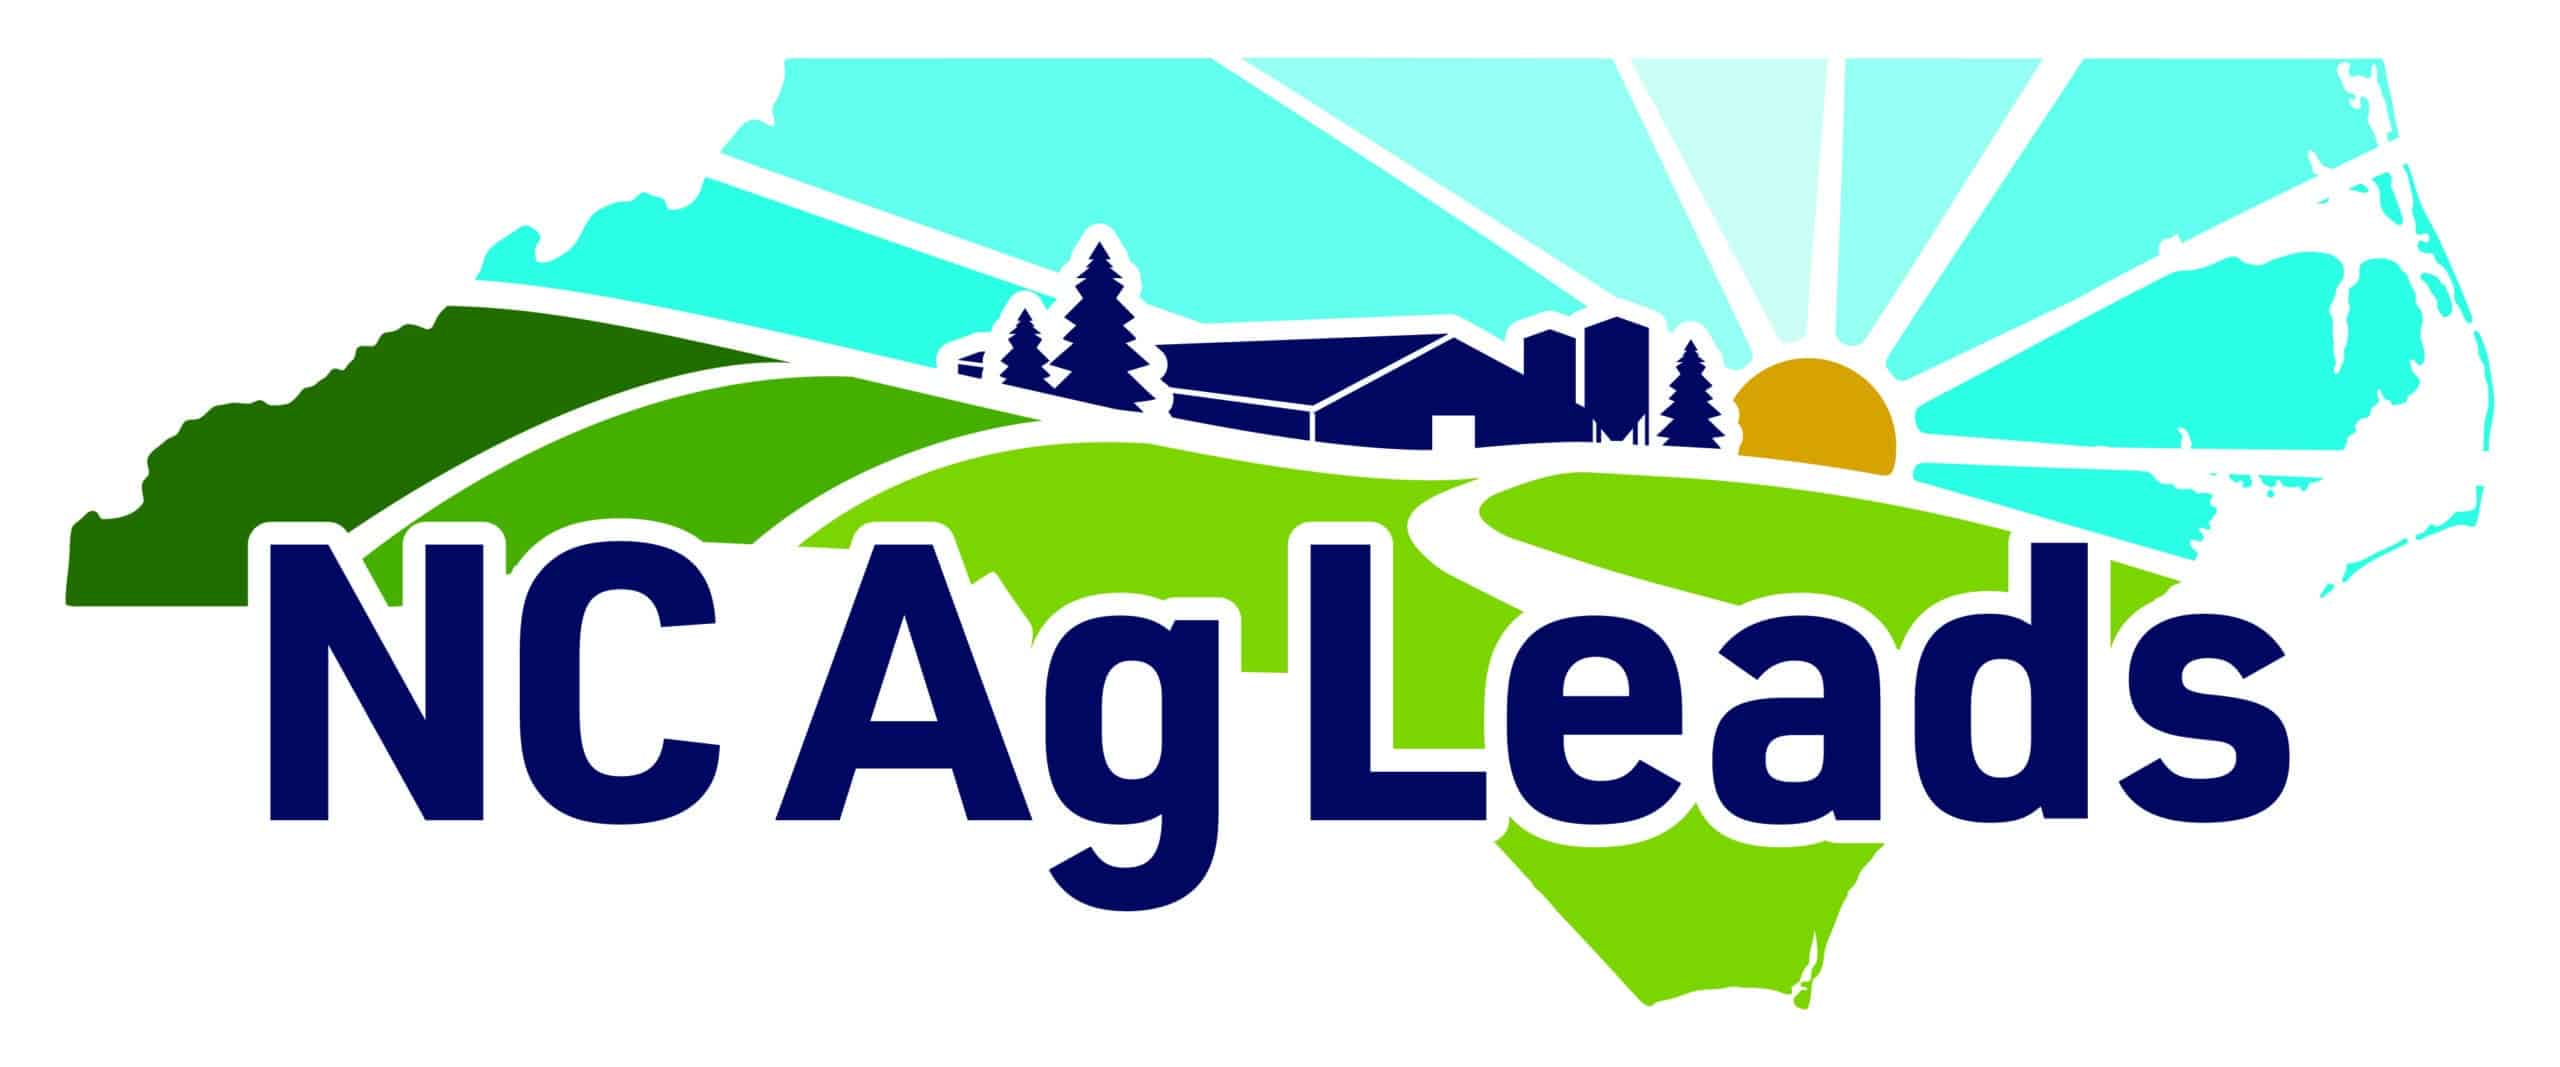 Strategic Planning Initiative to Strengthen North Carolina’s Position as a Leader for Agriculture and Agribusiness